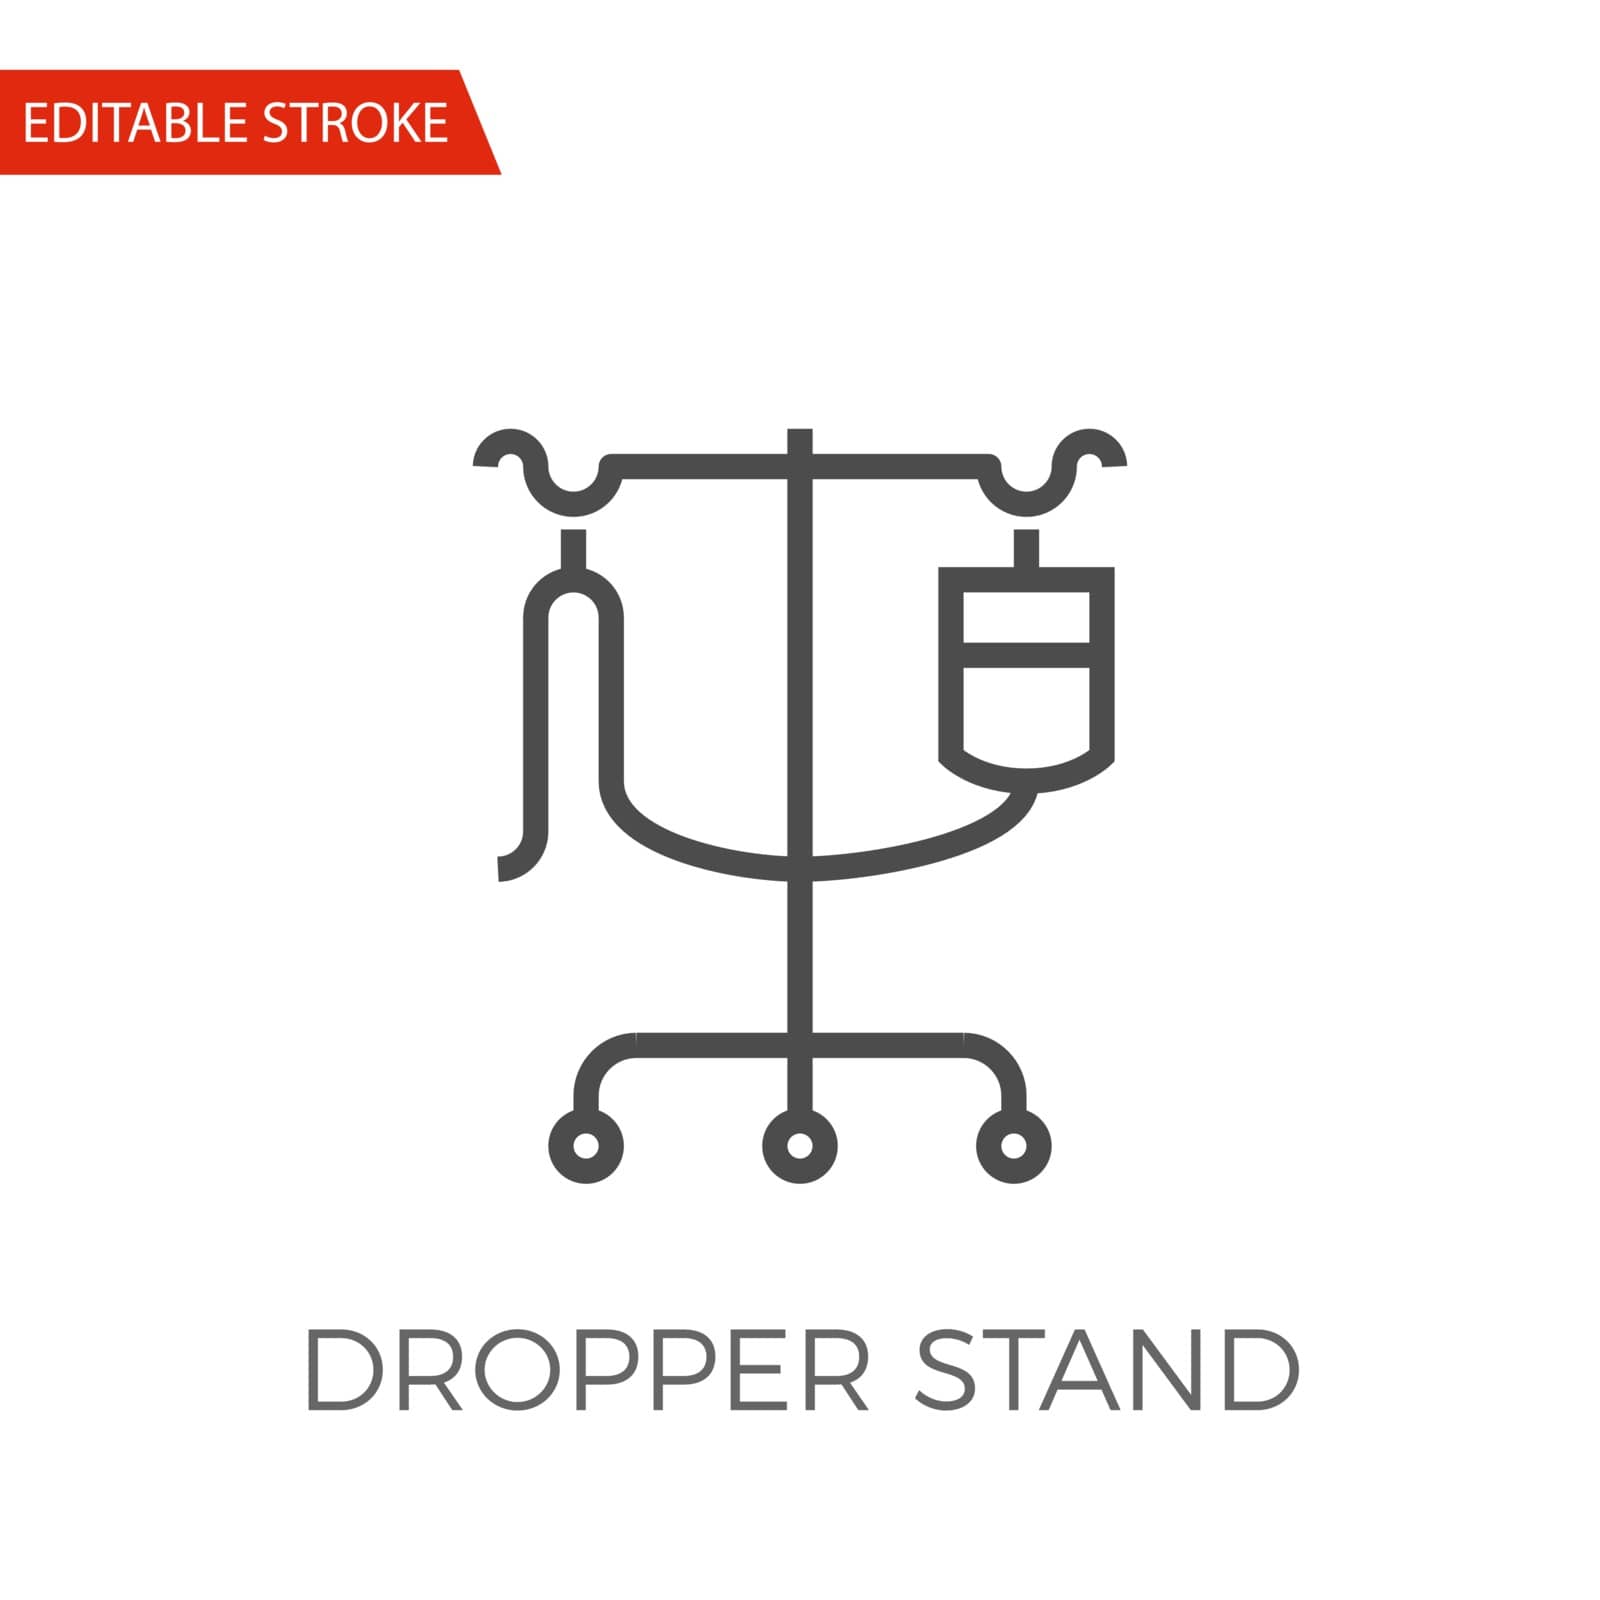 Dropper Stand Thin Line Vector Icon. Flat Icon Isolated on the White Background. Editable Stroke EPS file. Vector illustration.